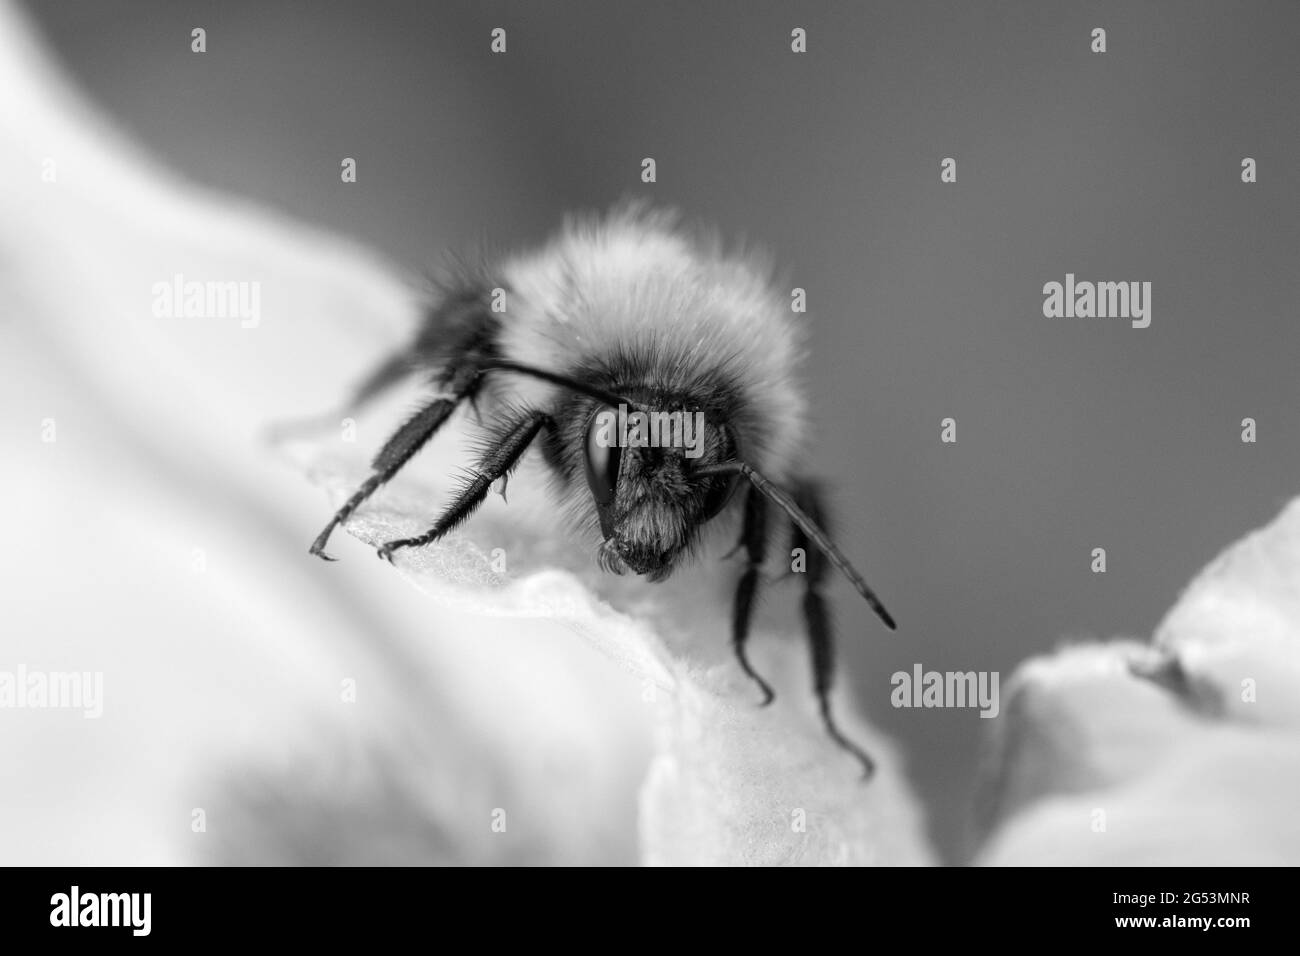 Black and white closeup image of a Bumblebee on Anemone tomentosa Stock Photo